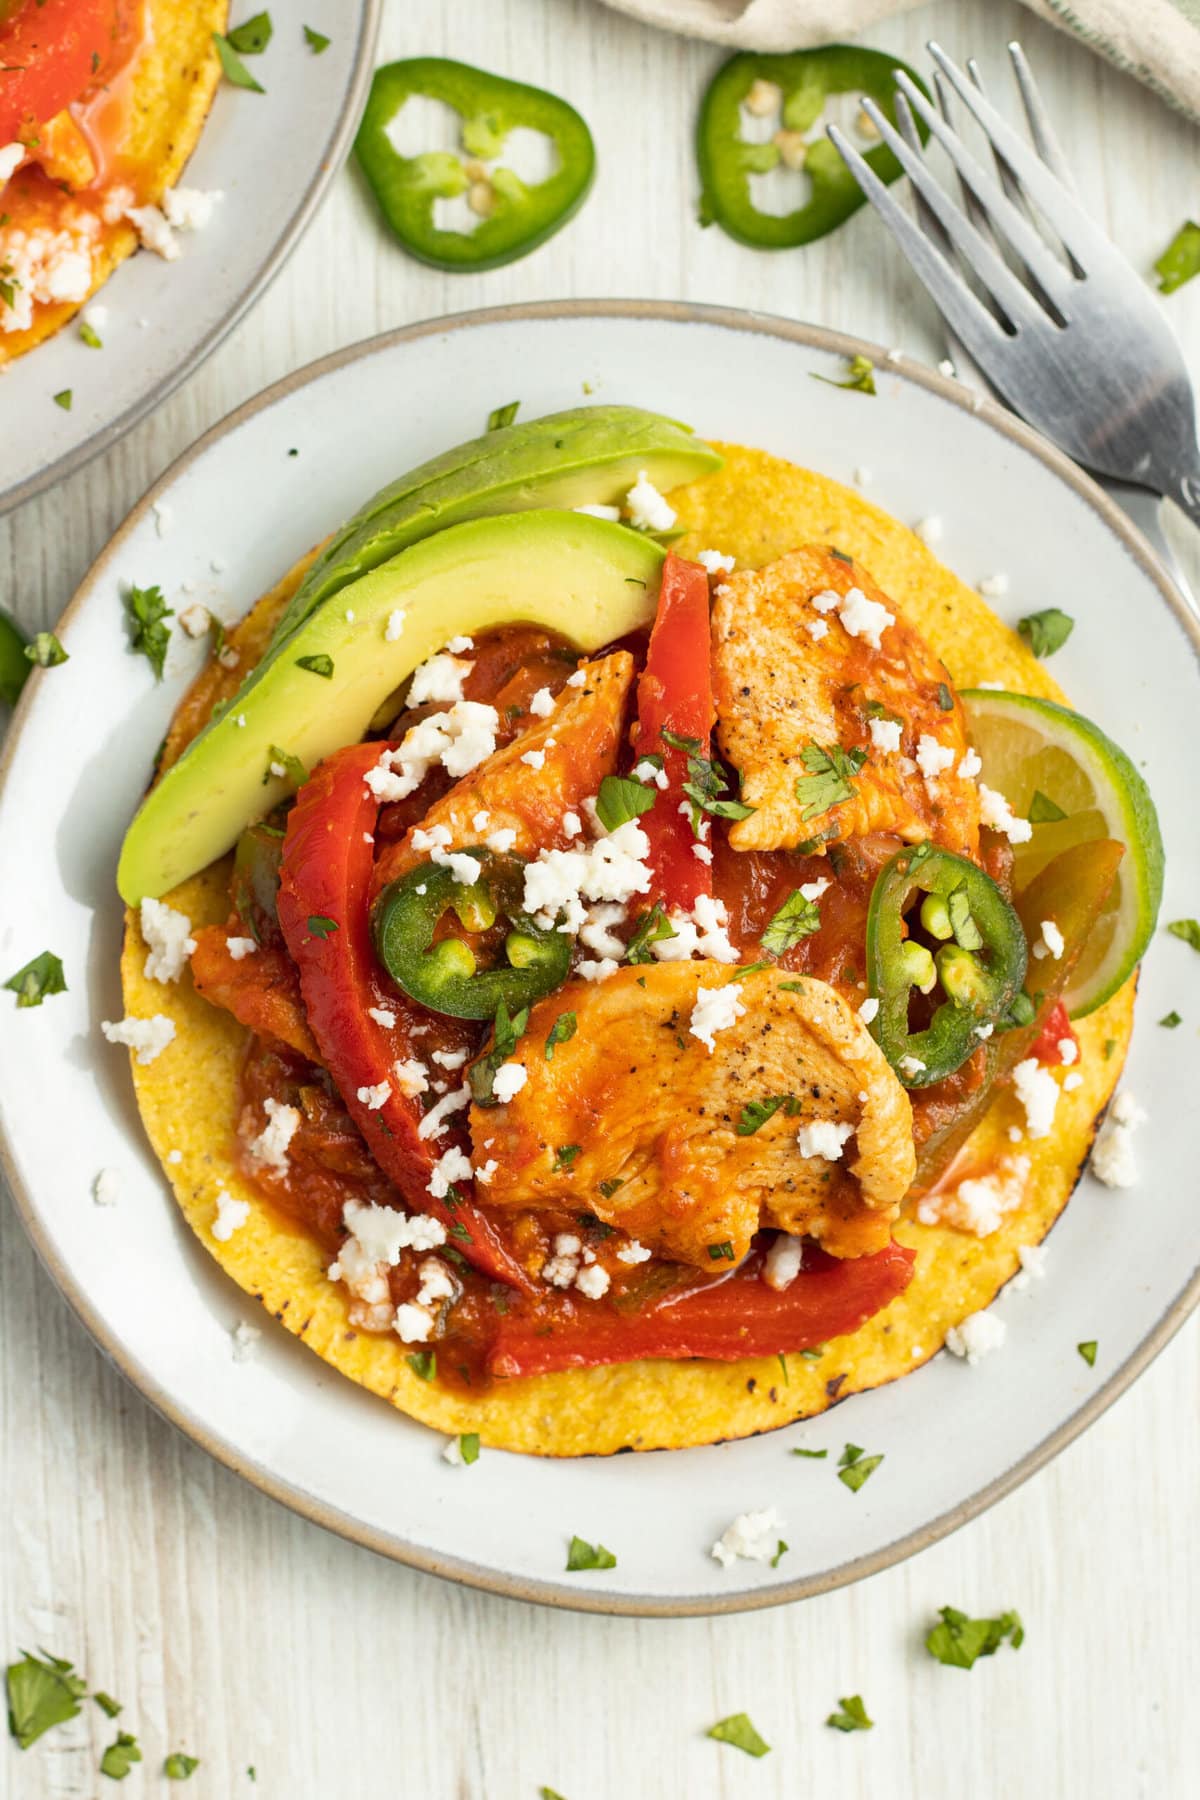 Chicken ranchero on a tostada with queso fresco, avocado, peppers, onions, and jalapeno.